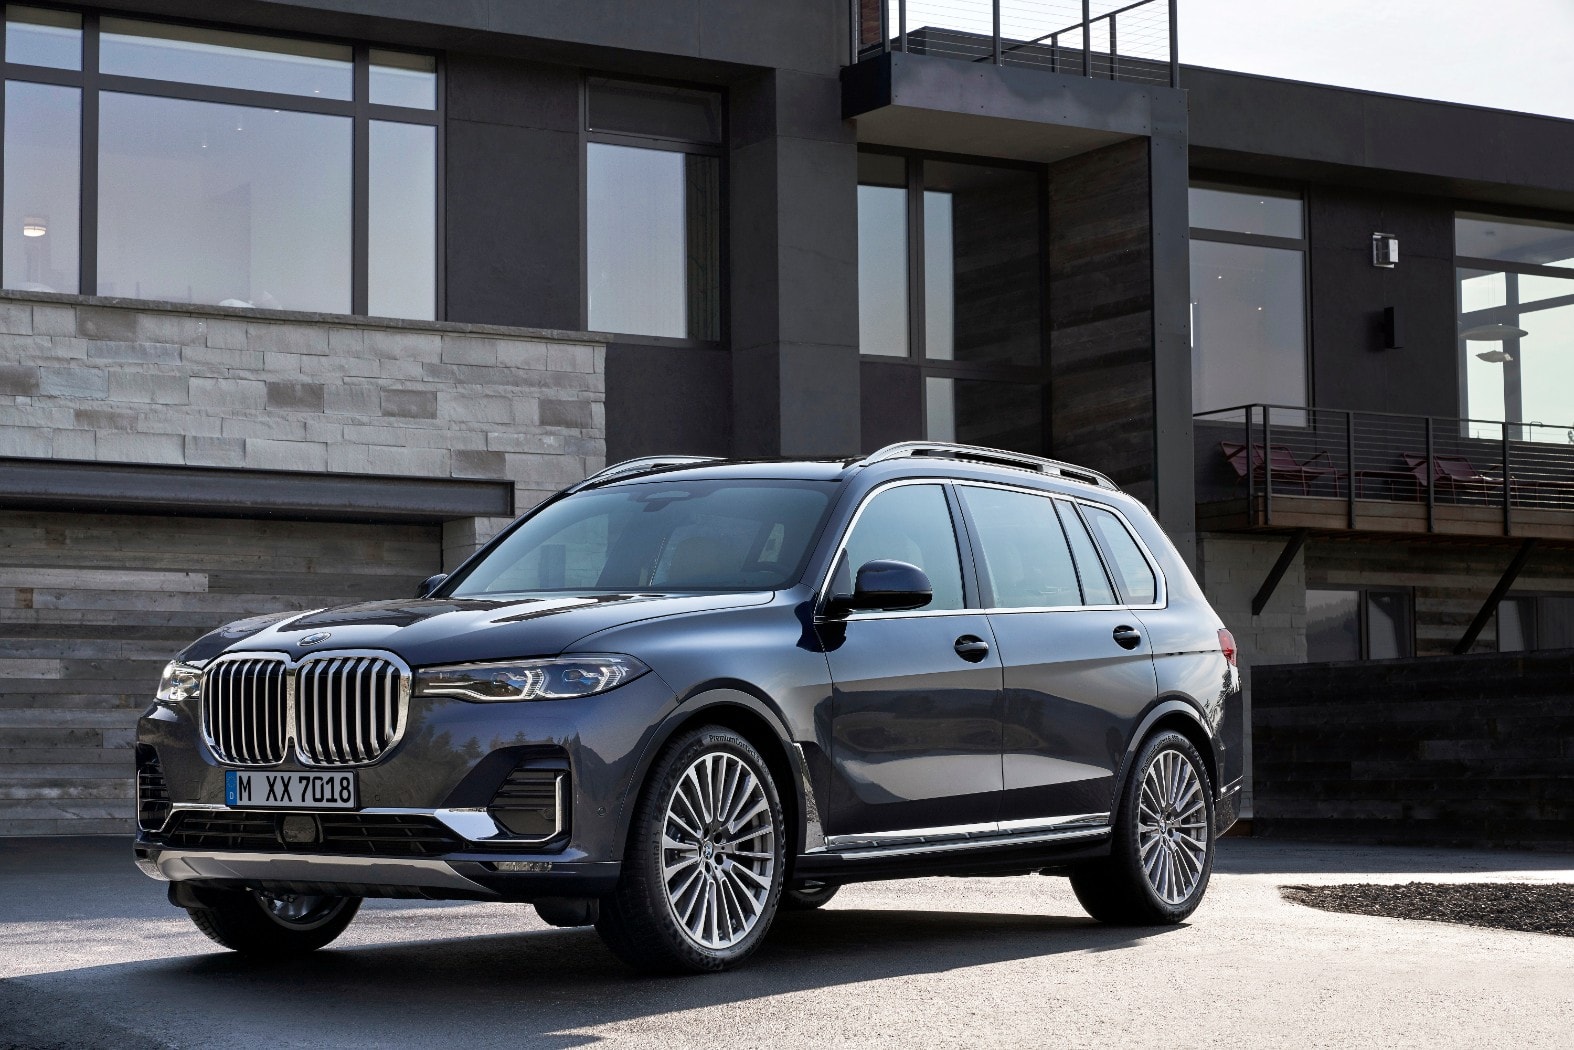 https://s1.cdn.autoevolution.com/images/news/2020-bmw-x7-g07-goes-official-with-7-seats-and-gigantic-kidney-grilles-129397_1.jpg